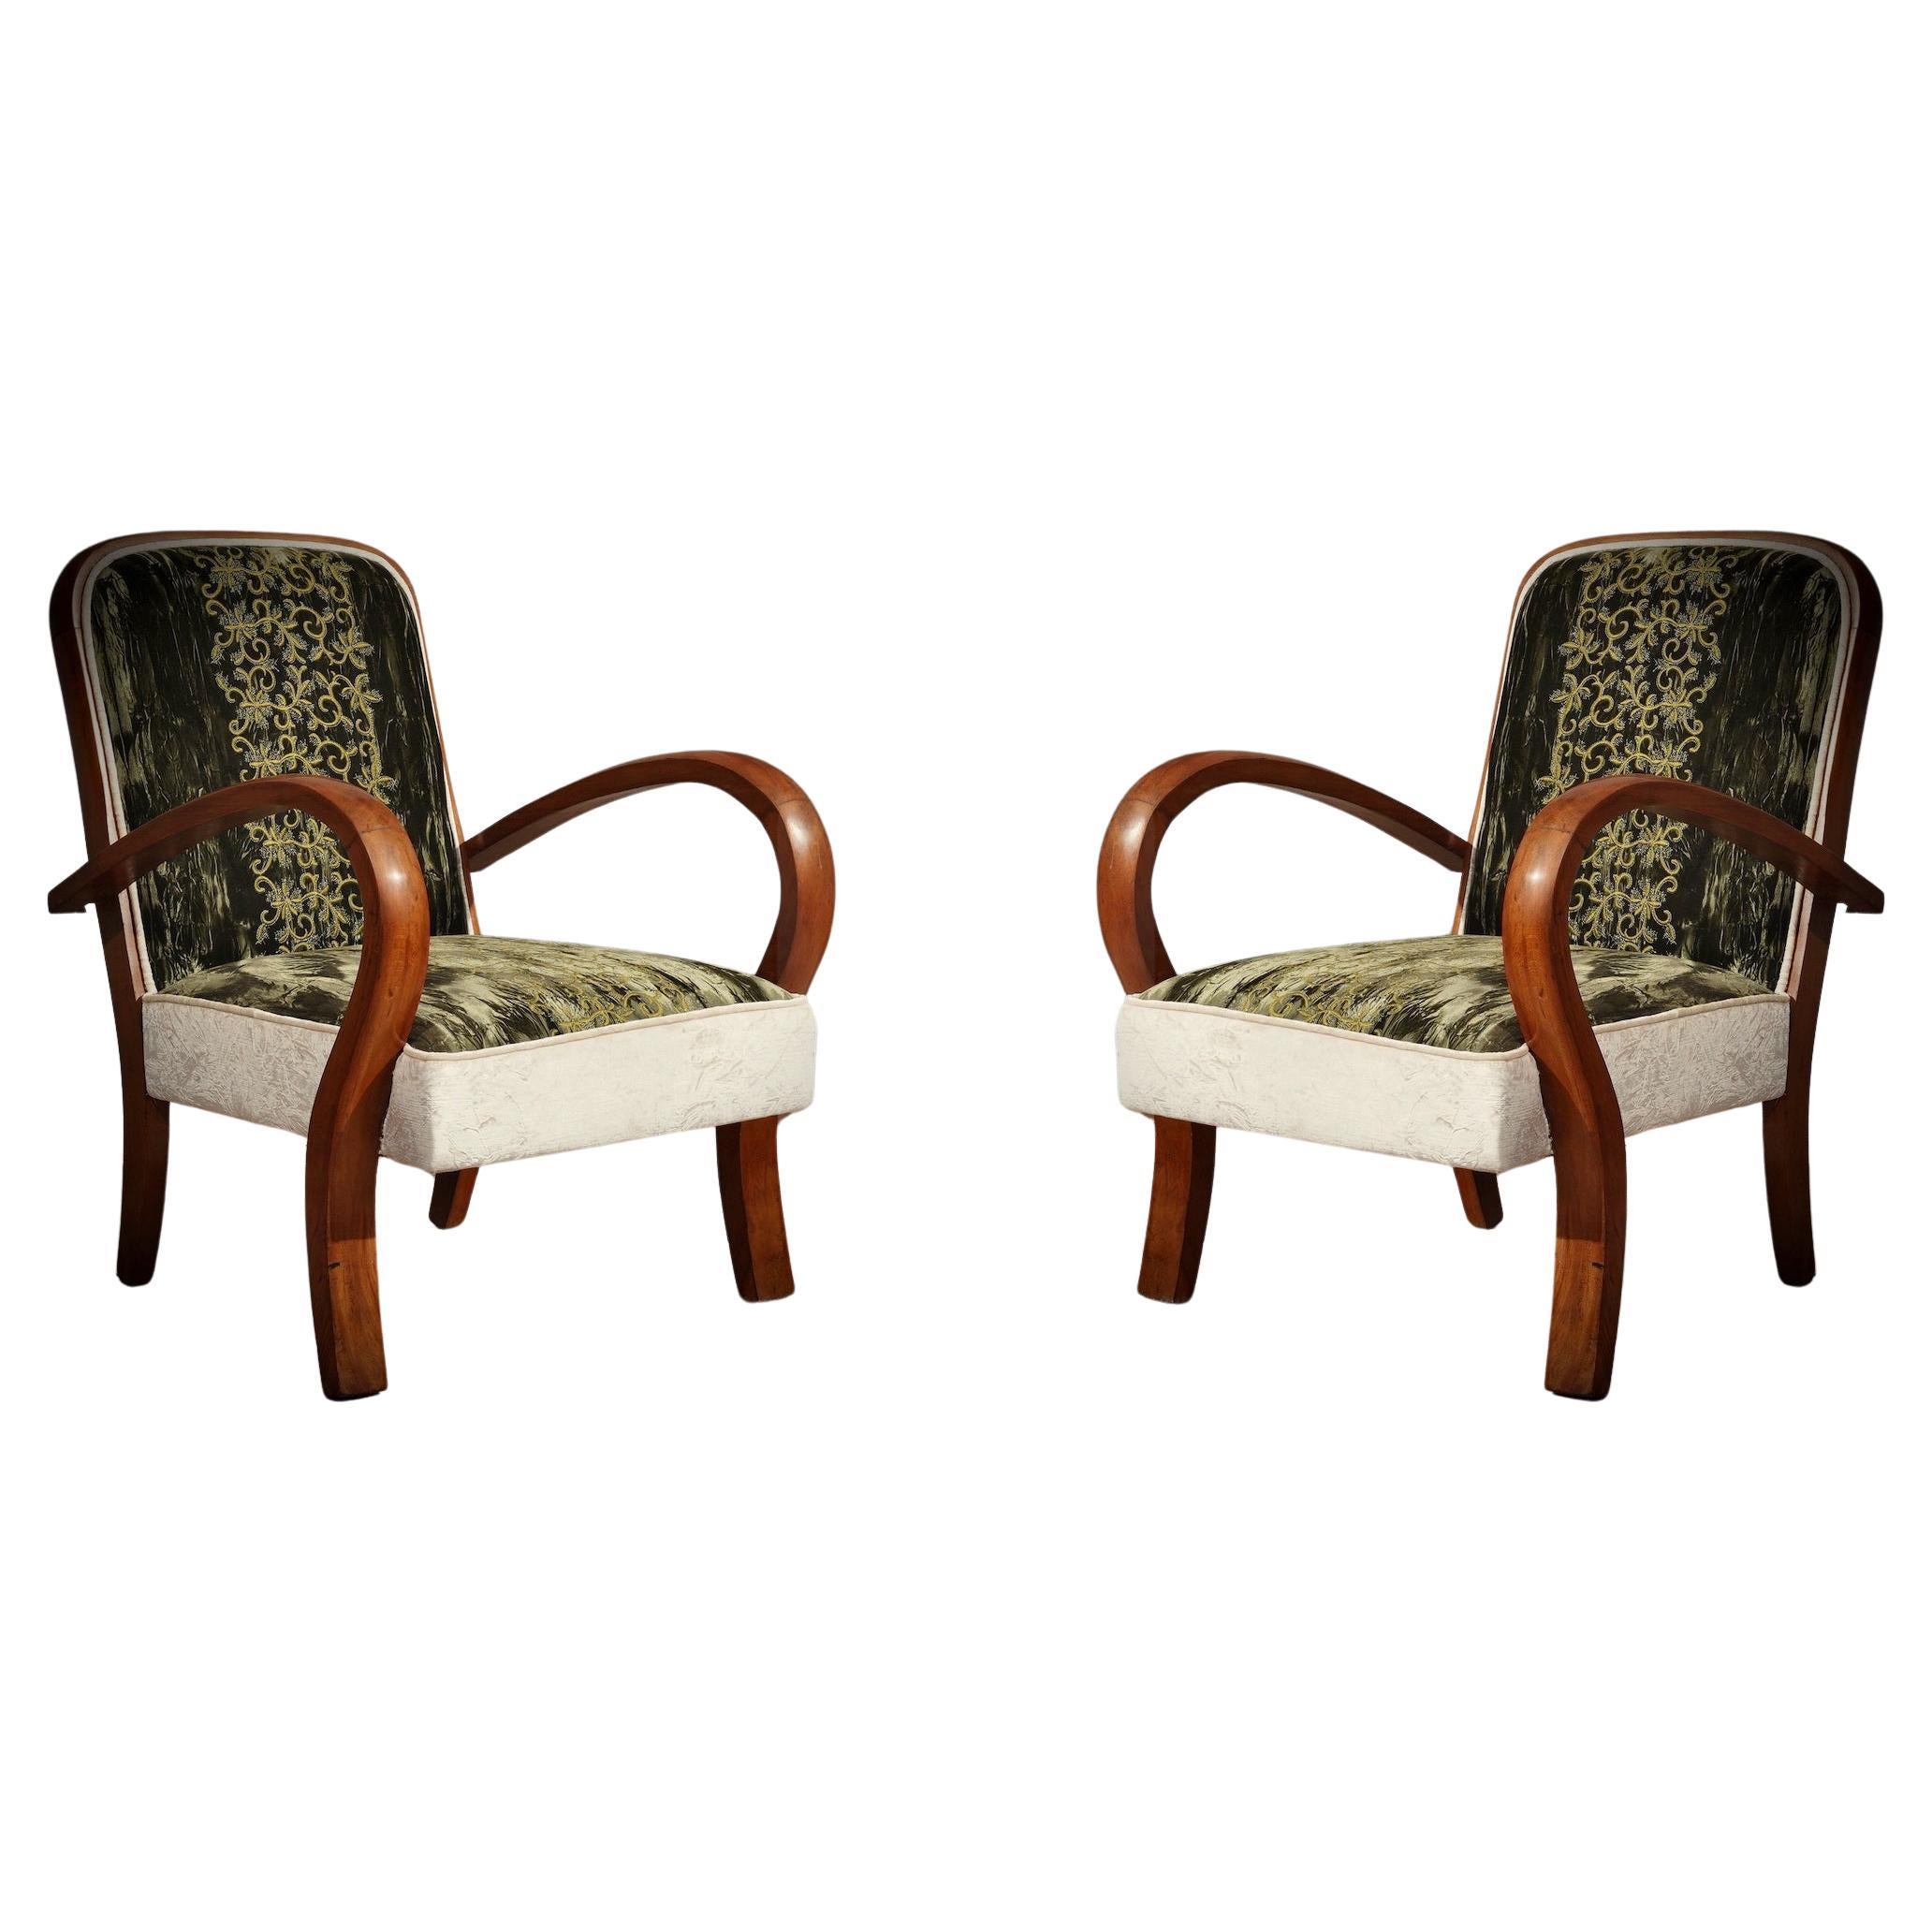 Art Deco Cherrywood Green and White Velvet Italian Club Chair / Armchairs, 1940 For Sale